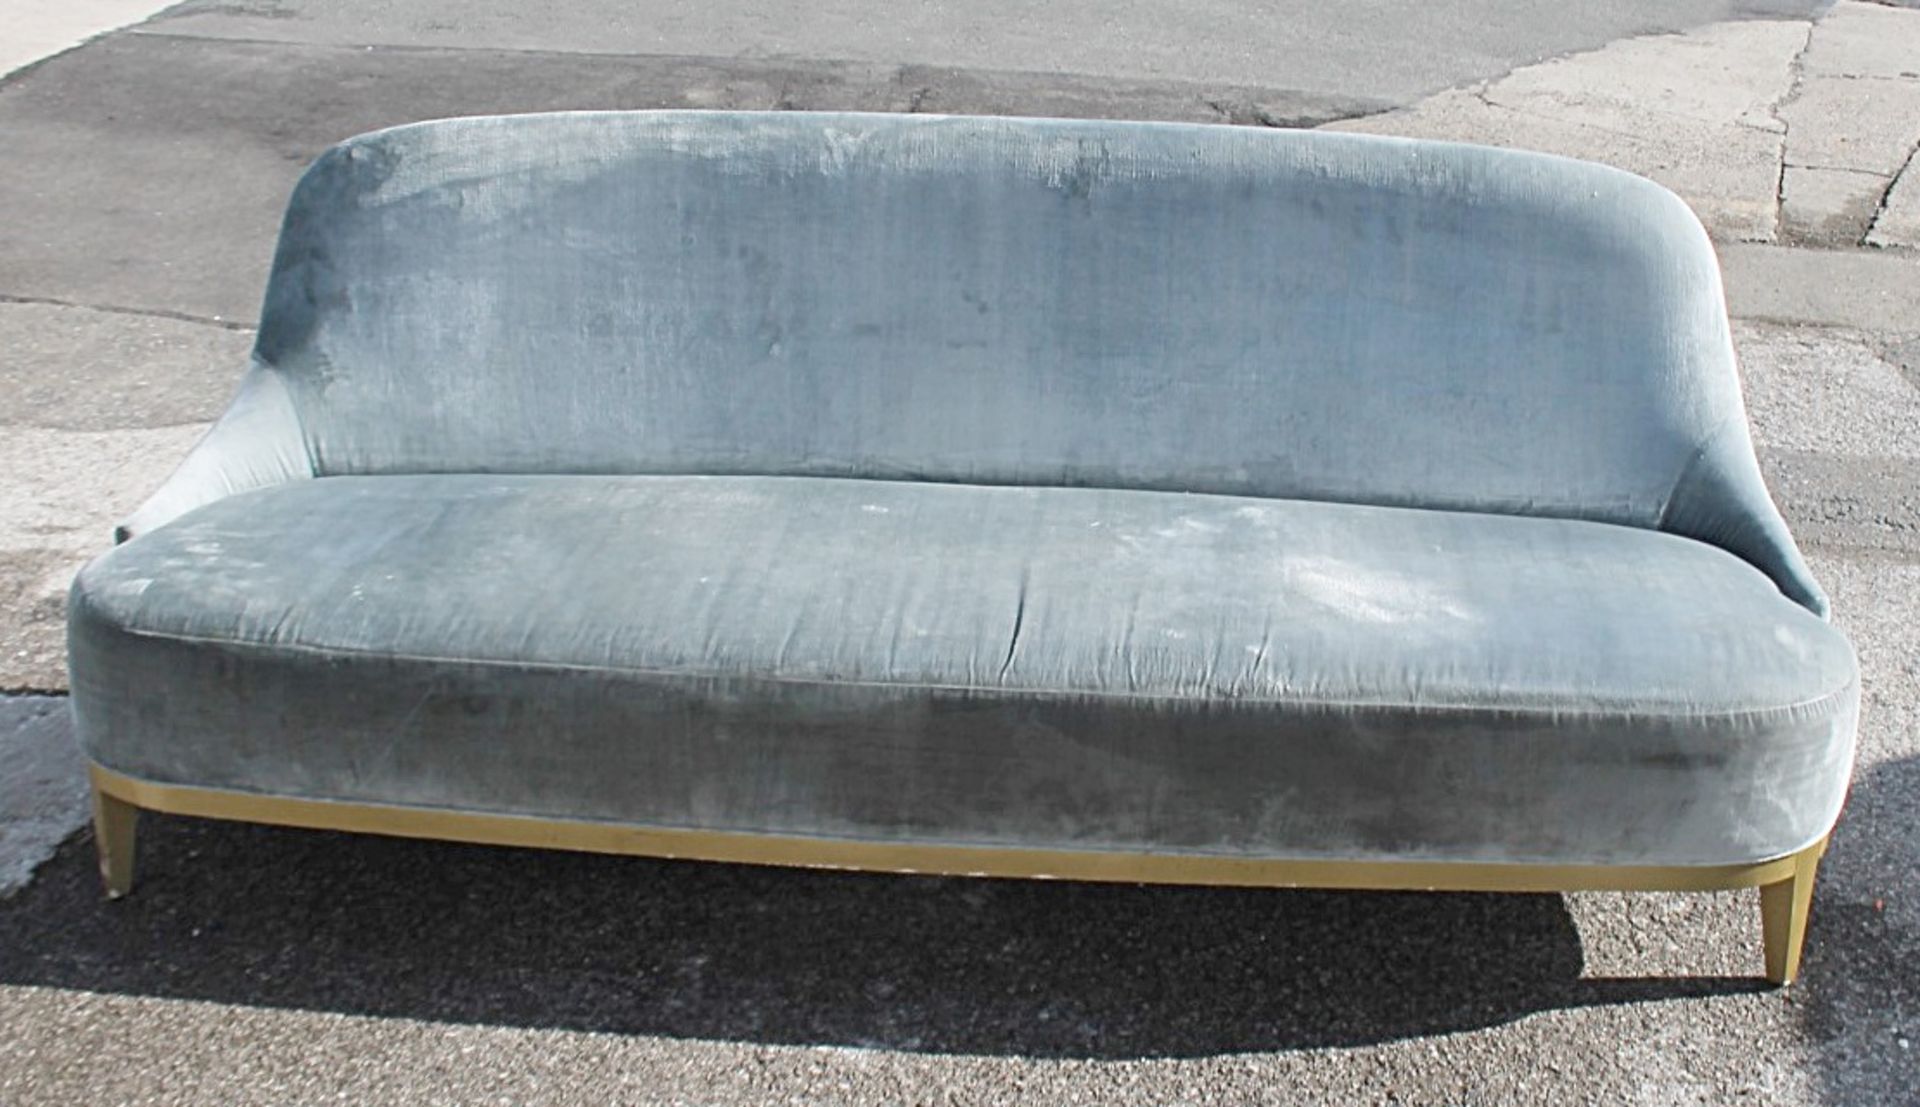 1 x Opulent Velvet Upholstered Sofa In Blue-Silver Tone With A Curved Base In Gold - Image 6 of 13